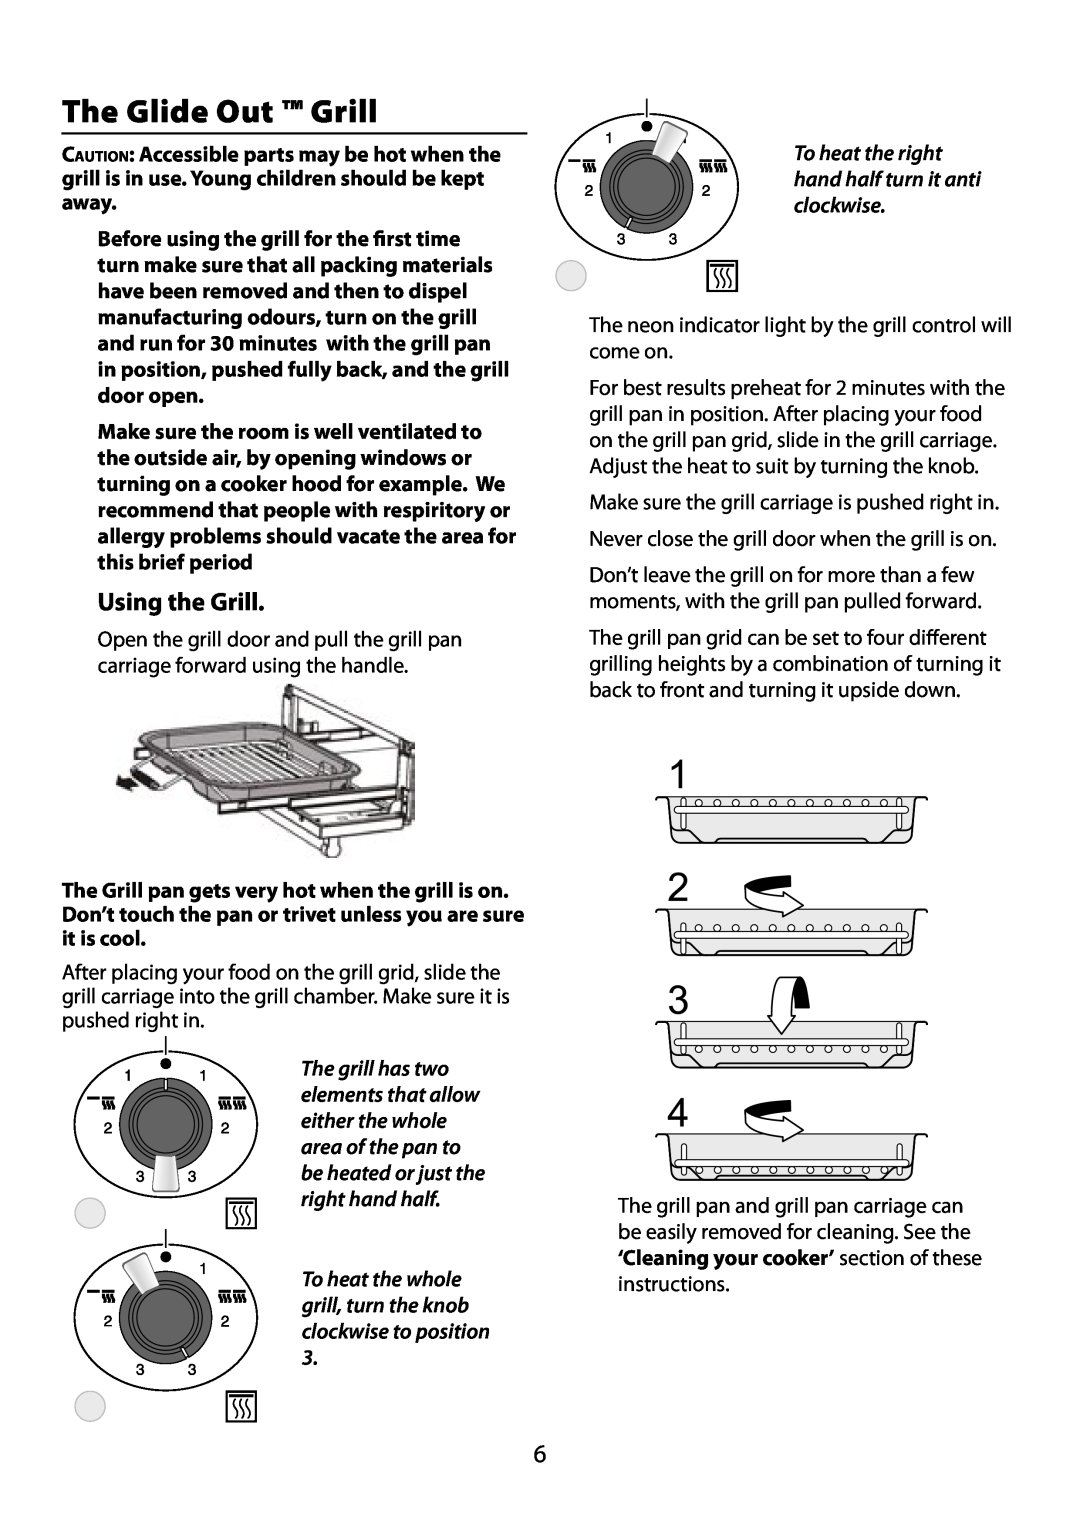 Garmin 210 GEO T DL user manual The Glide Out Grill, Using the Grill 